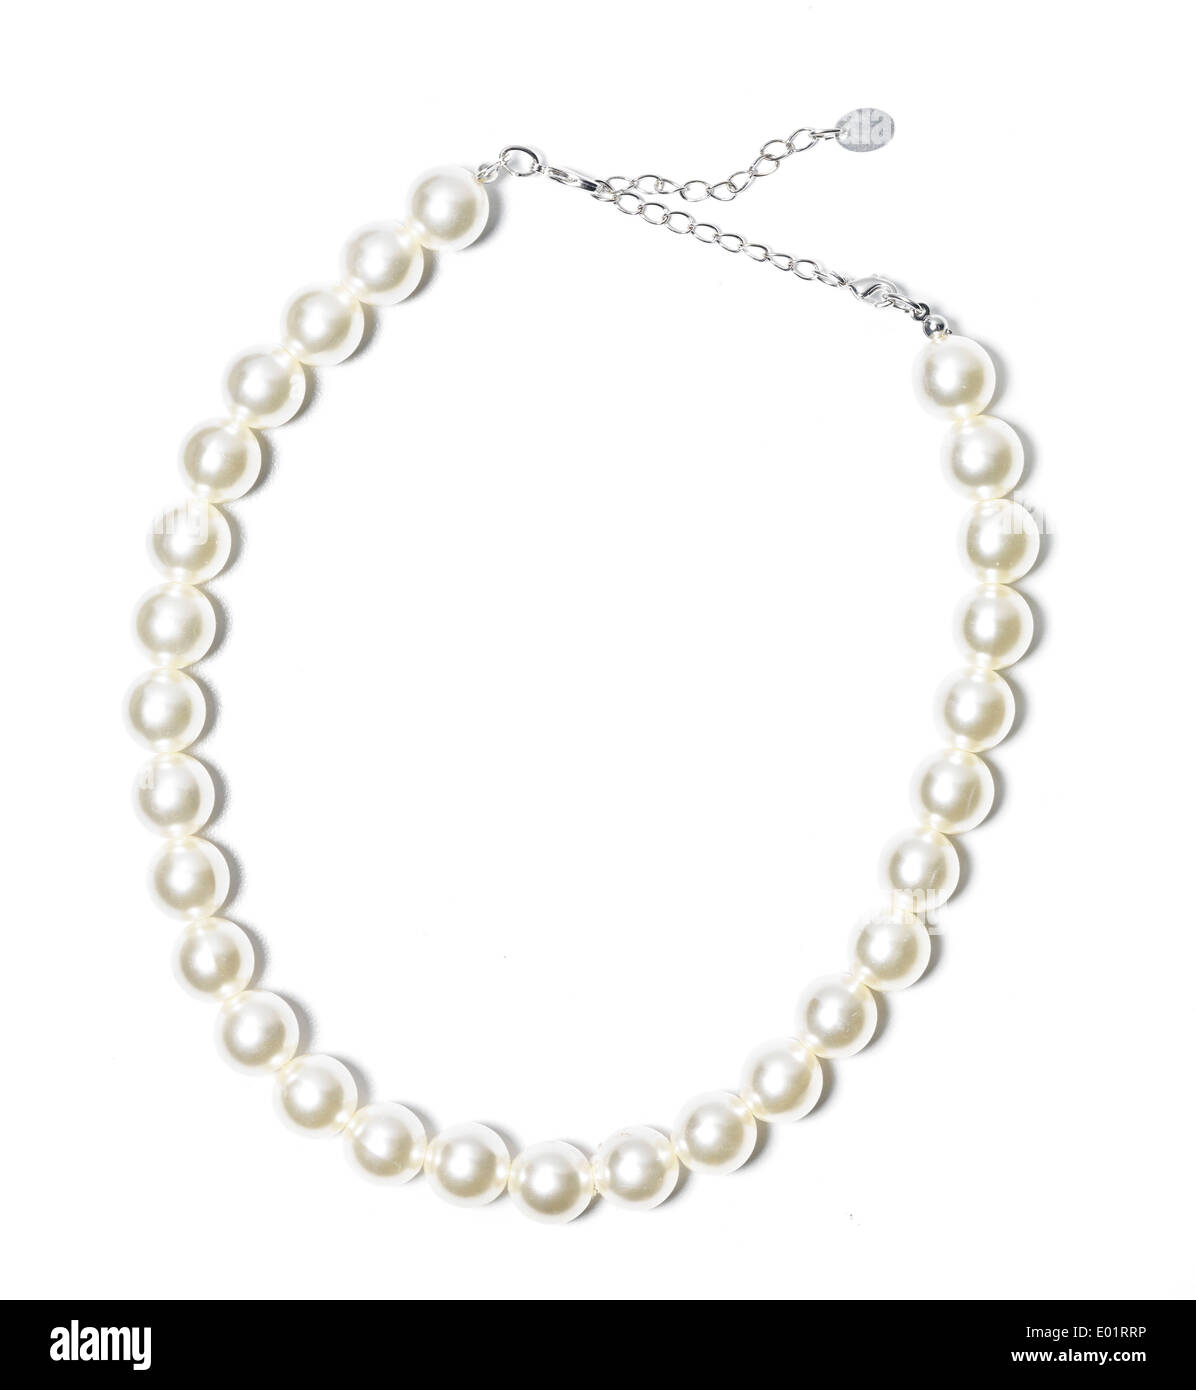 String of pearls, cut out on white background Stock Photo